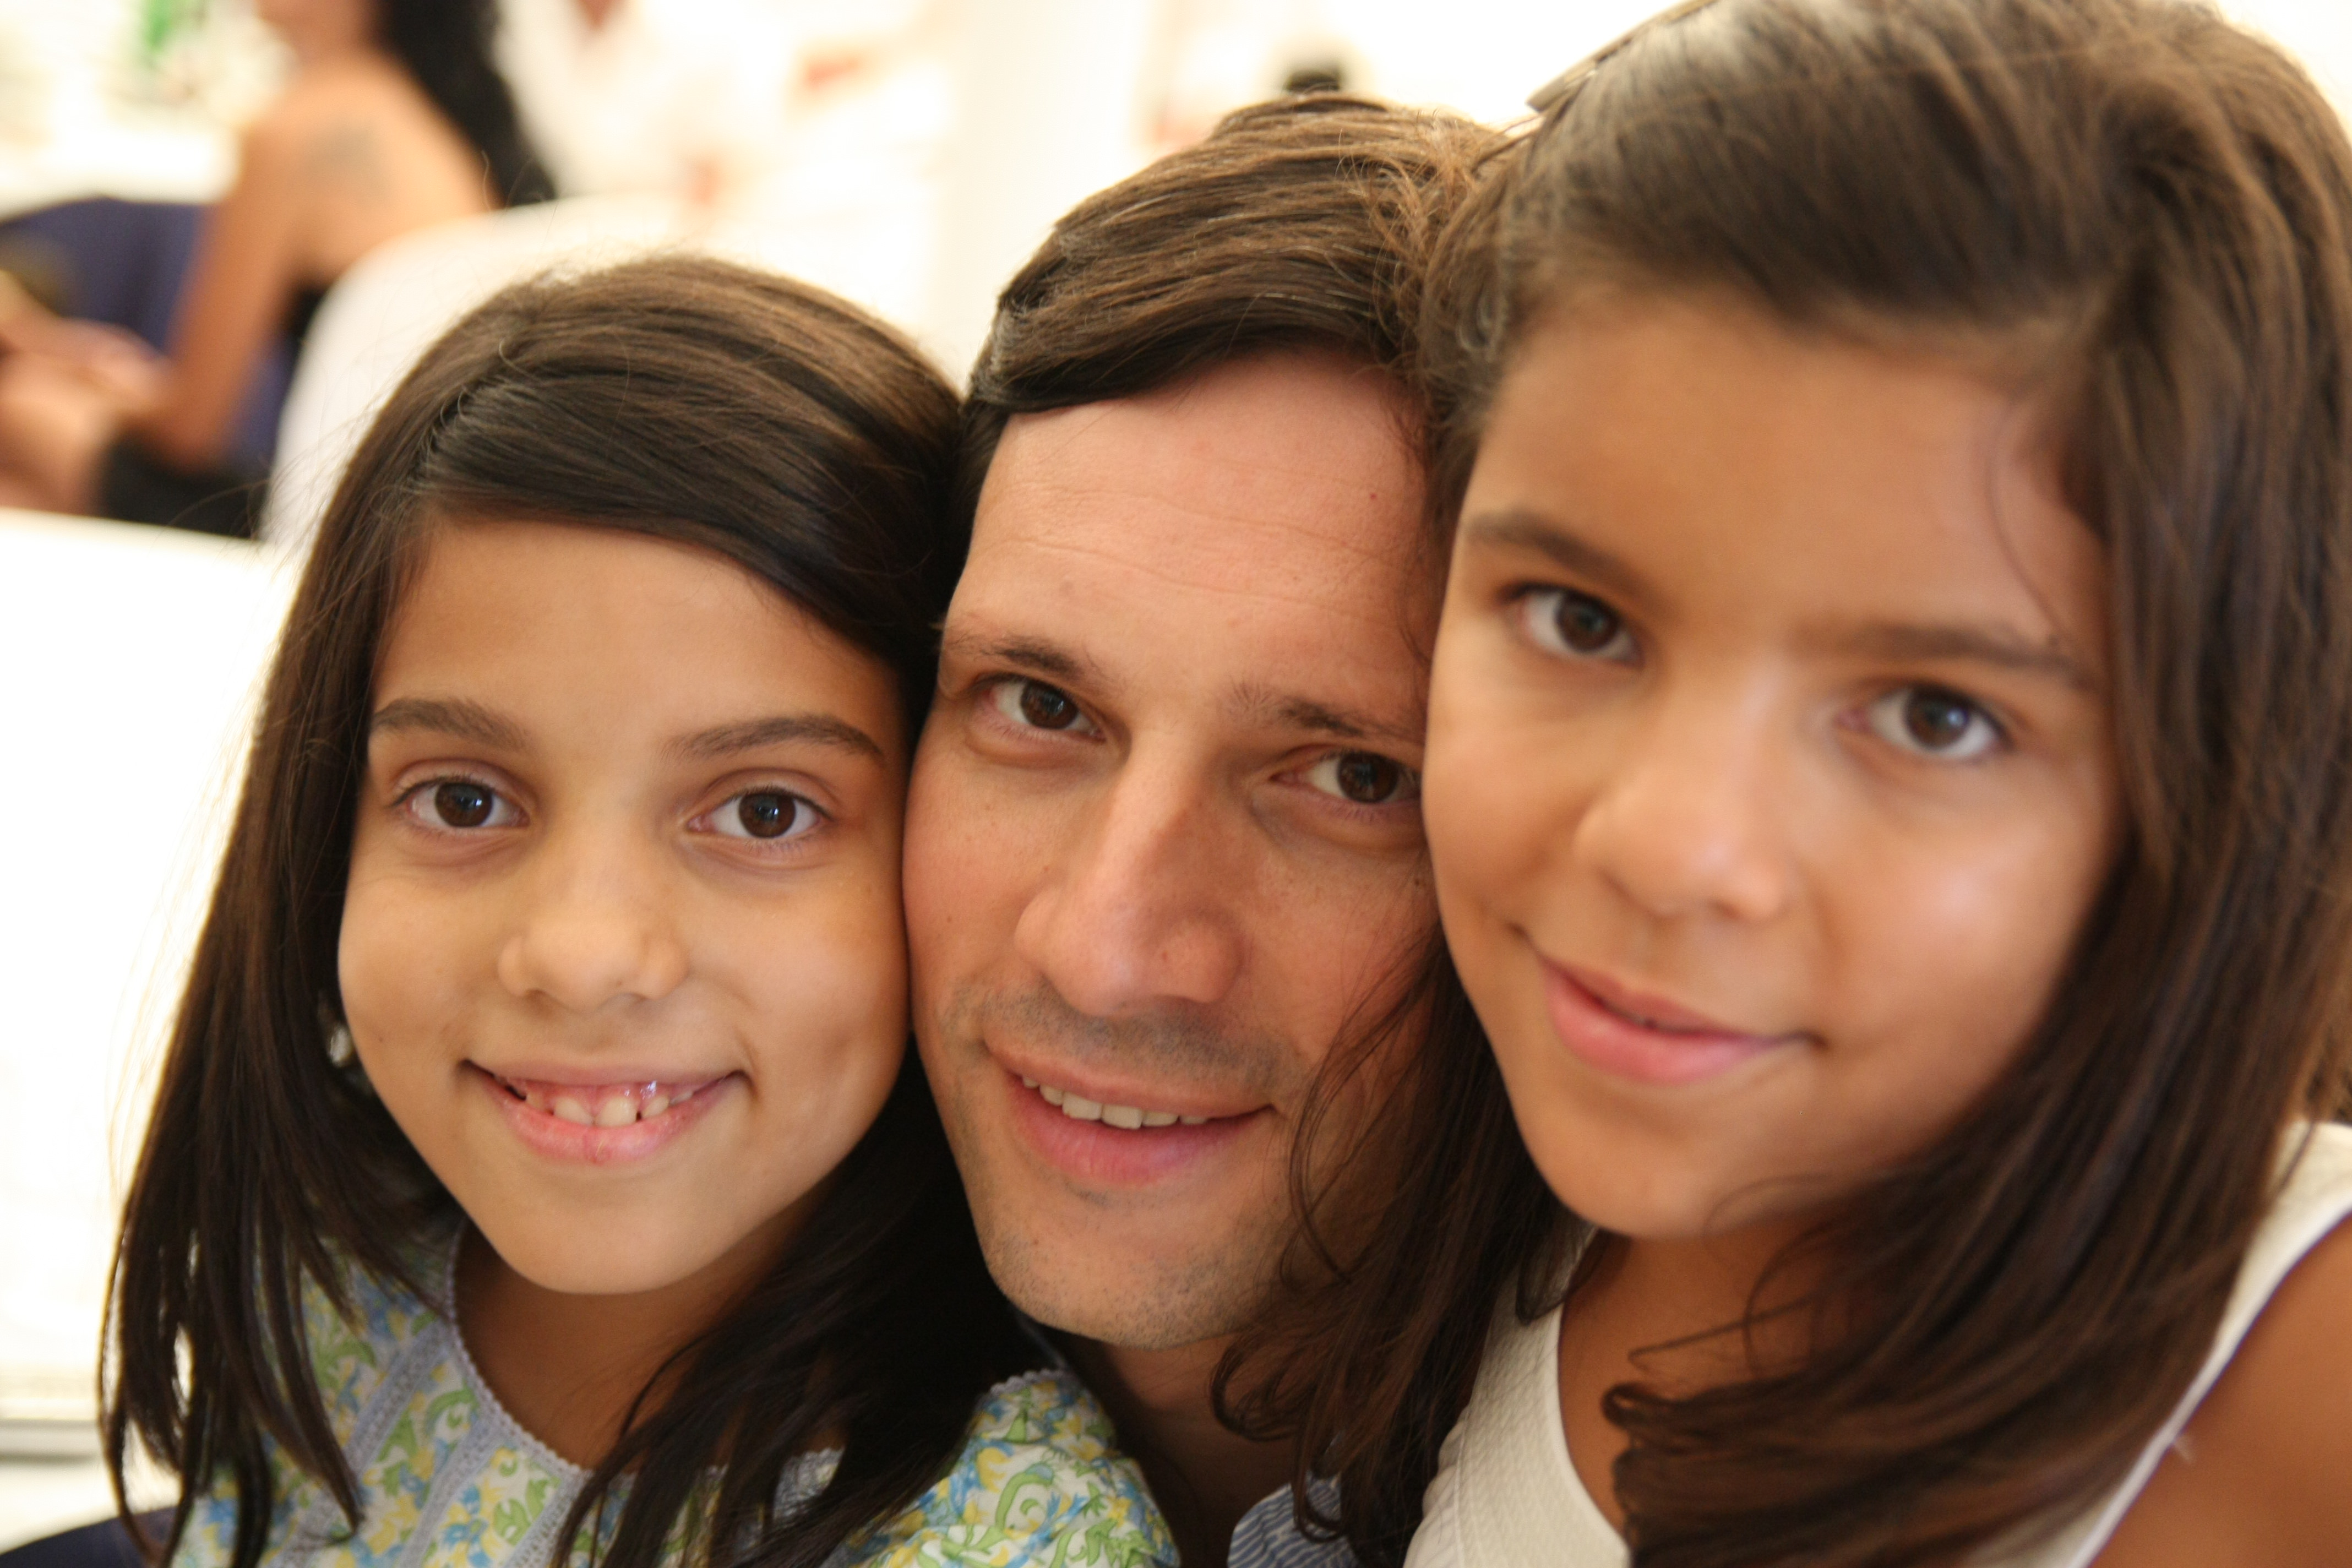 Castanho with his daughters, Catarina (left) and Sofia (right).